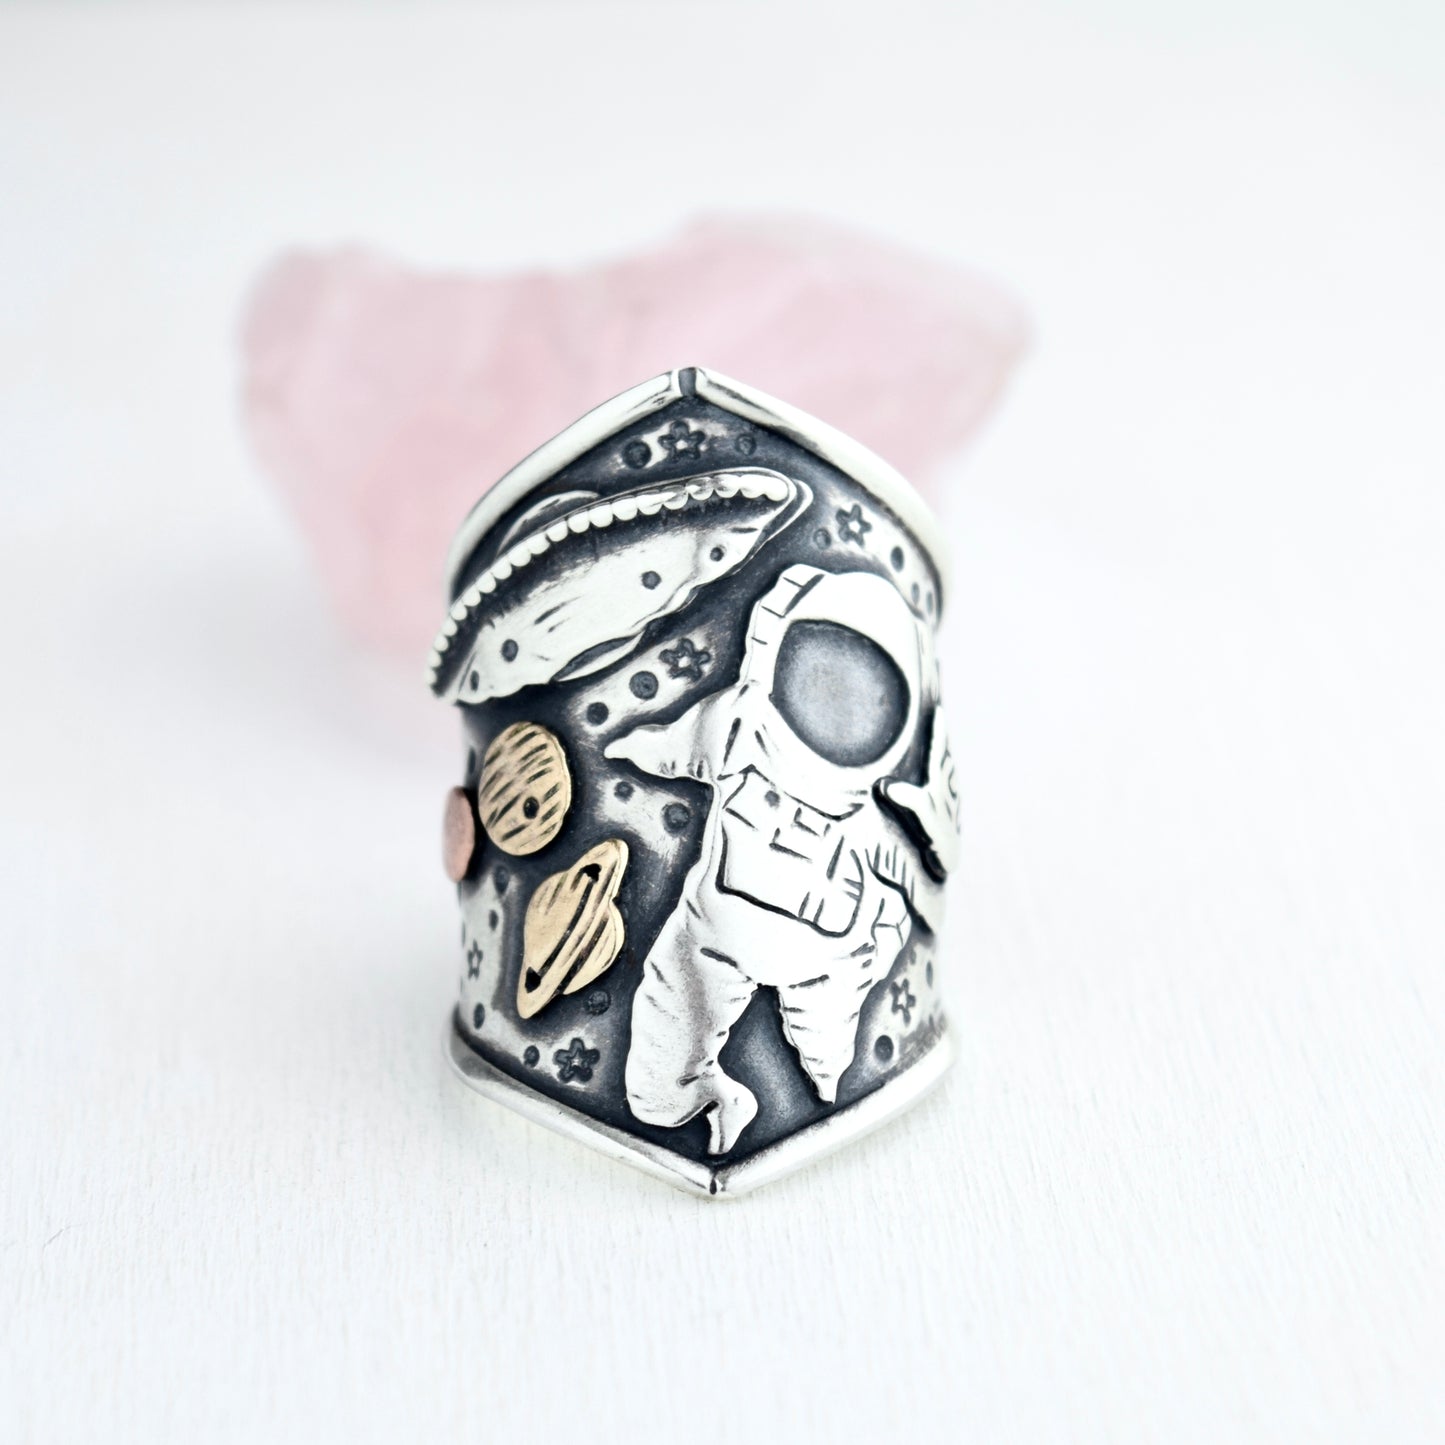 Alien Abduction Shield Ring size 6.75/7